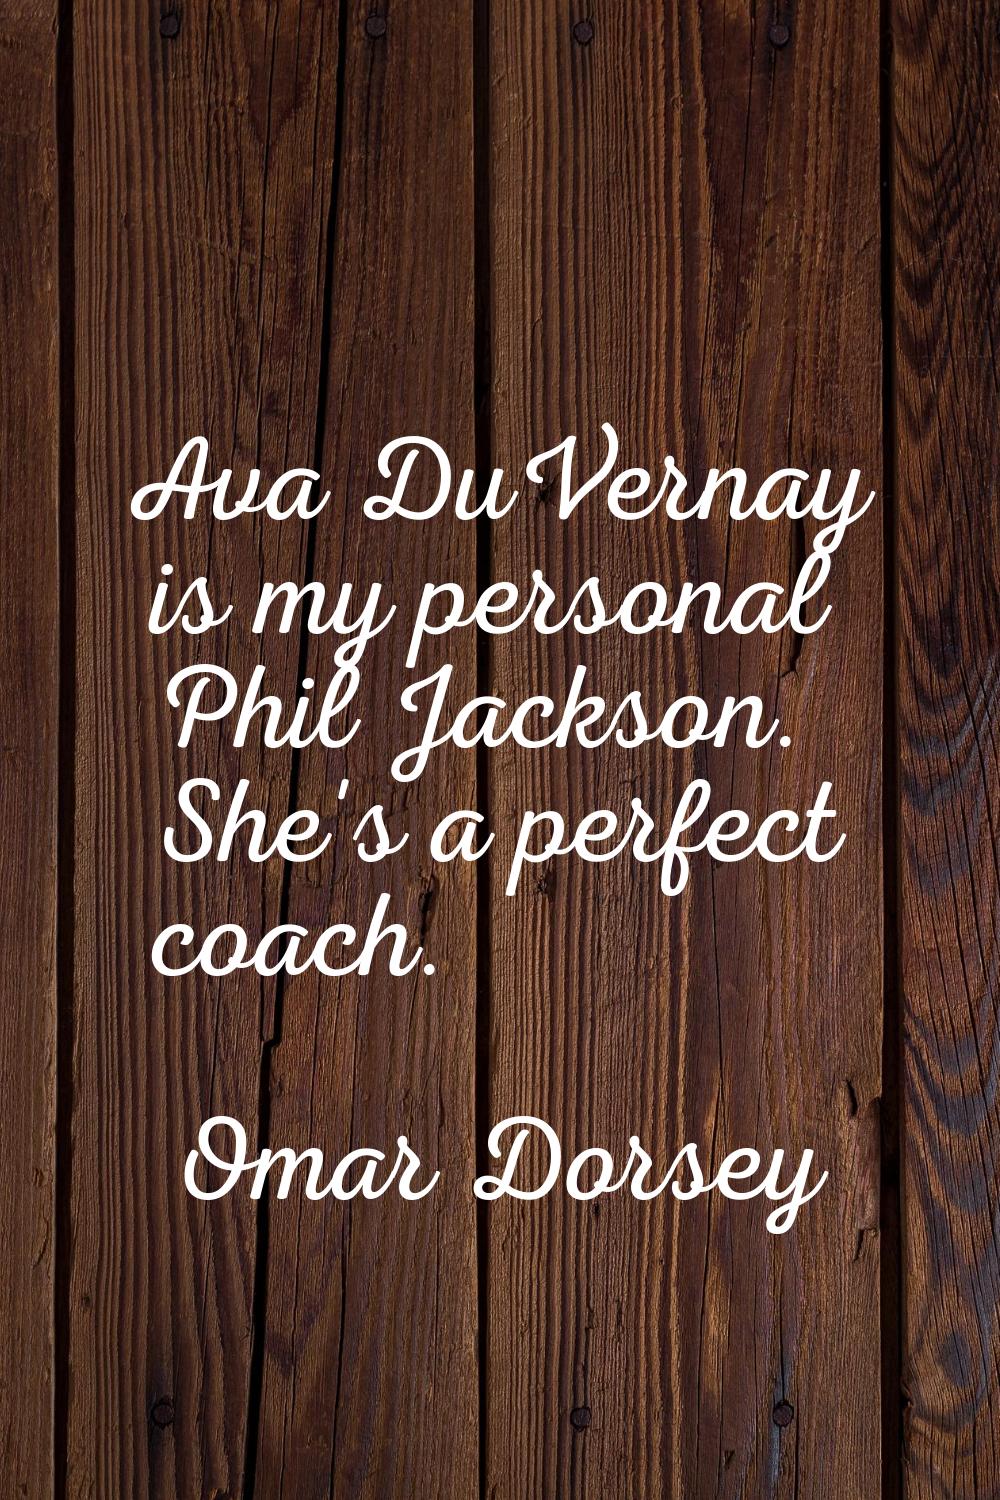 Ava DuVernay is my personal Phil Jackson. She's a perfect coach.